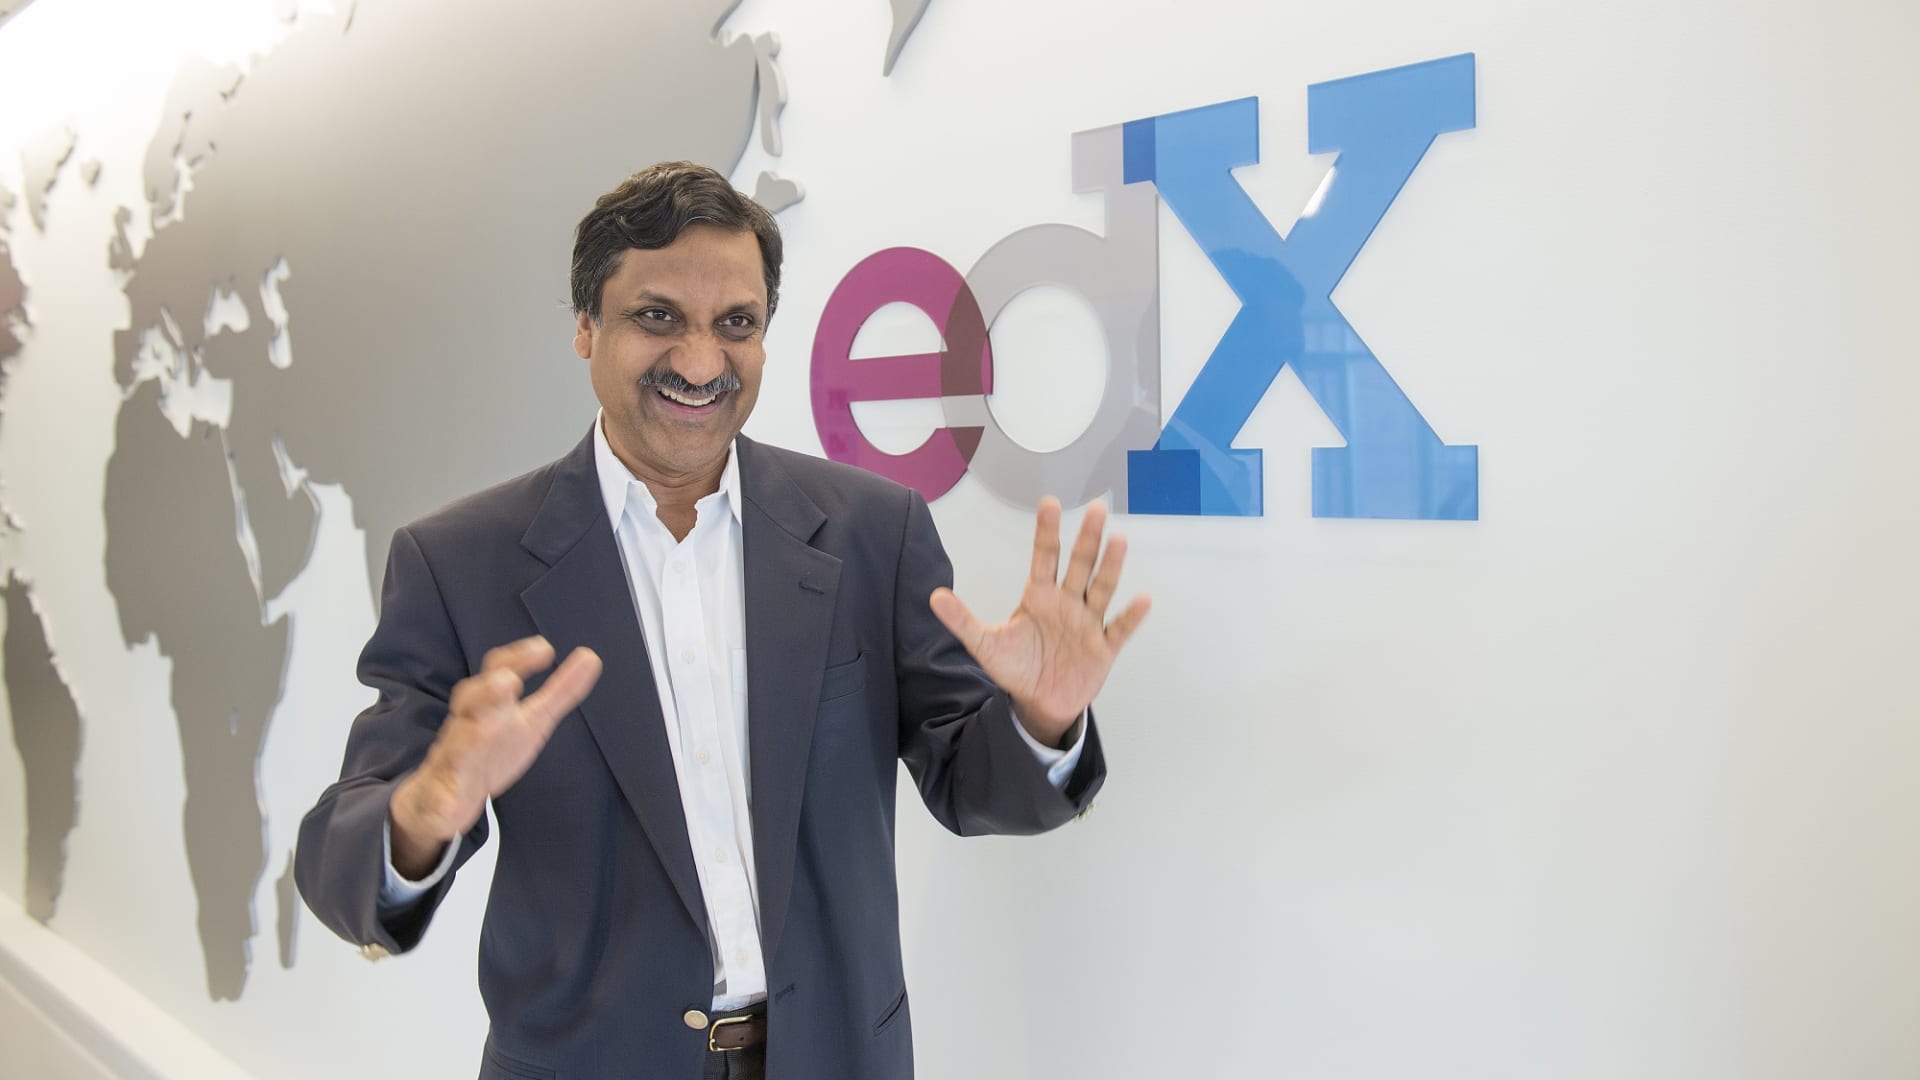 Anant Agarwal, CEO of EdX, and Professor of Electrical Engineering and Computer Science at MIT